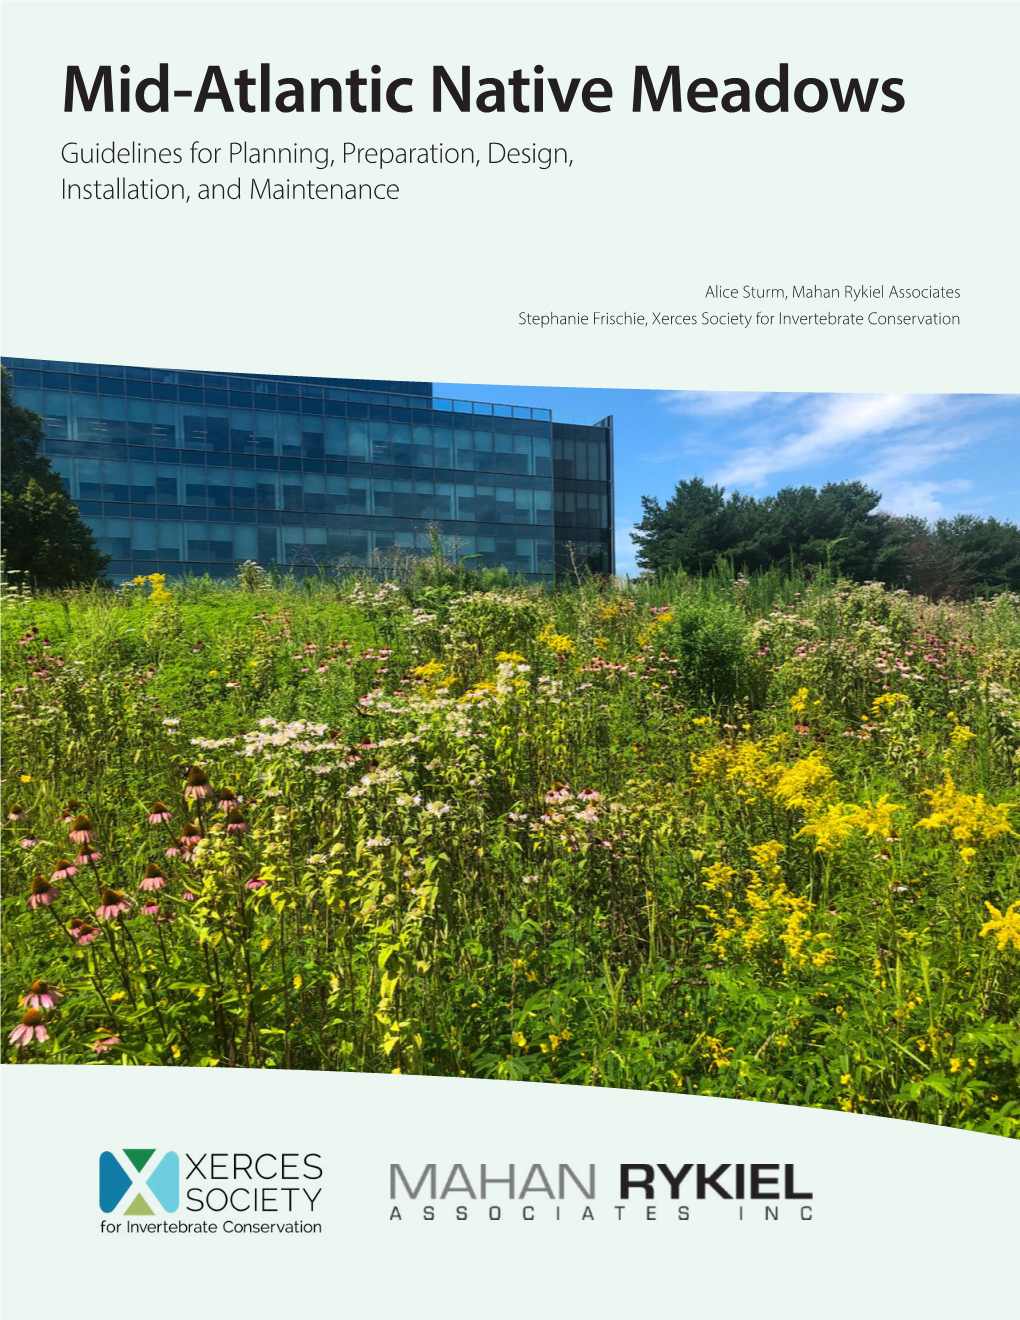 Mid-Atlantic Native Meadows Guidelines for Planning, Preparation, Design, Installation, and Maintenance